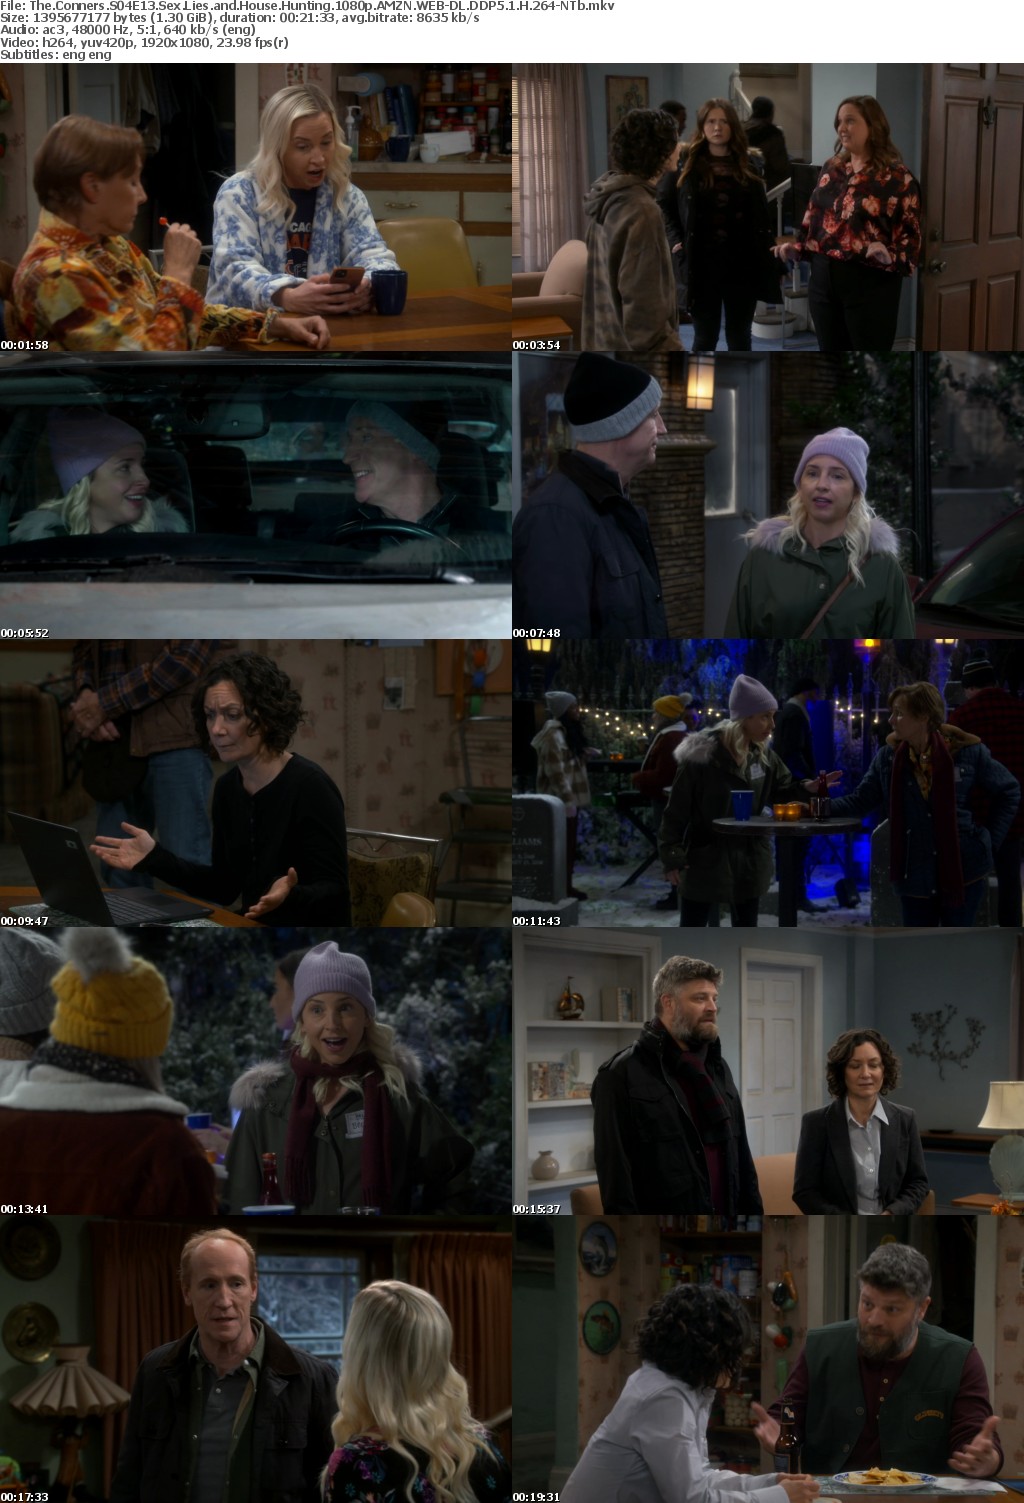 The Conners S04E13 Sex Lies and House Hunting 1080p AMZN WEBRip DDP5 1 x264-NTb